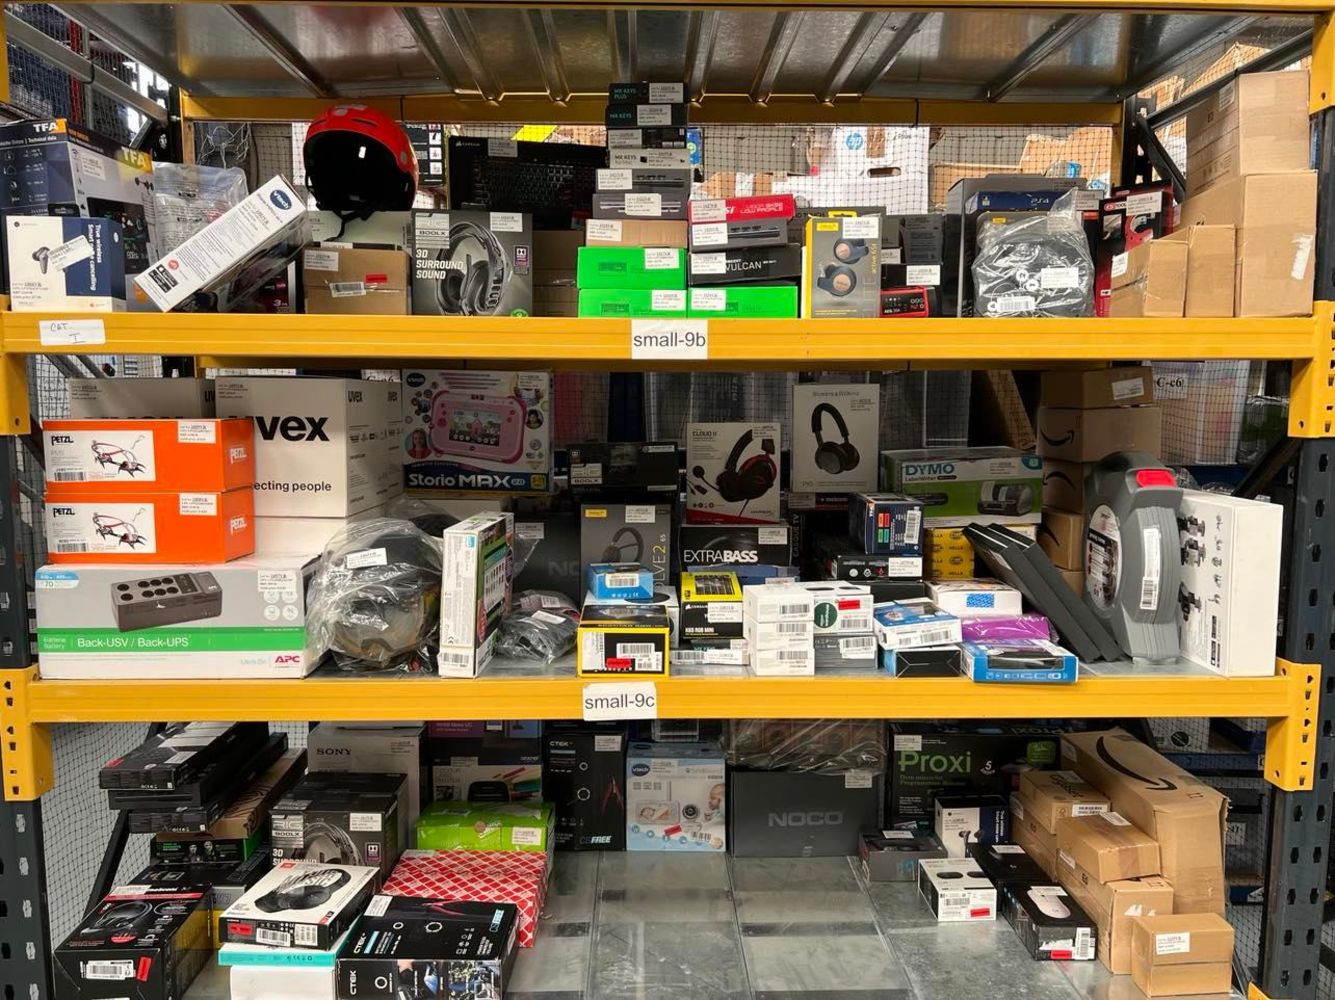 ||Apple, Fossil, Bosch, Ghd, Grohe, VTech, Oral-B||Watch, Cctv, Airpods, Humidifier, Trimmer, Headset, Mouse||General Sale! Amazon Raw Returns||